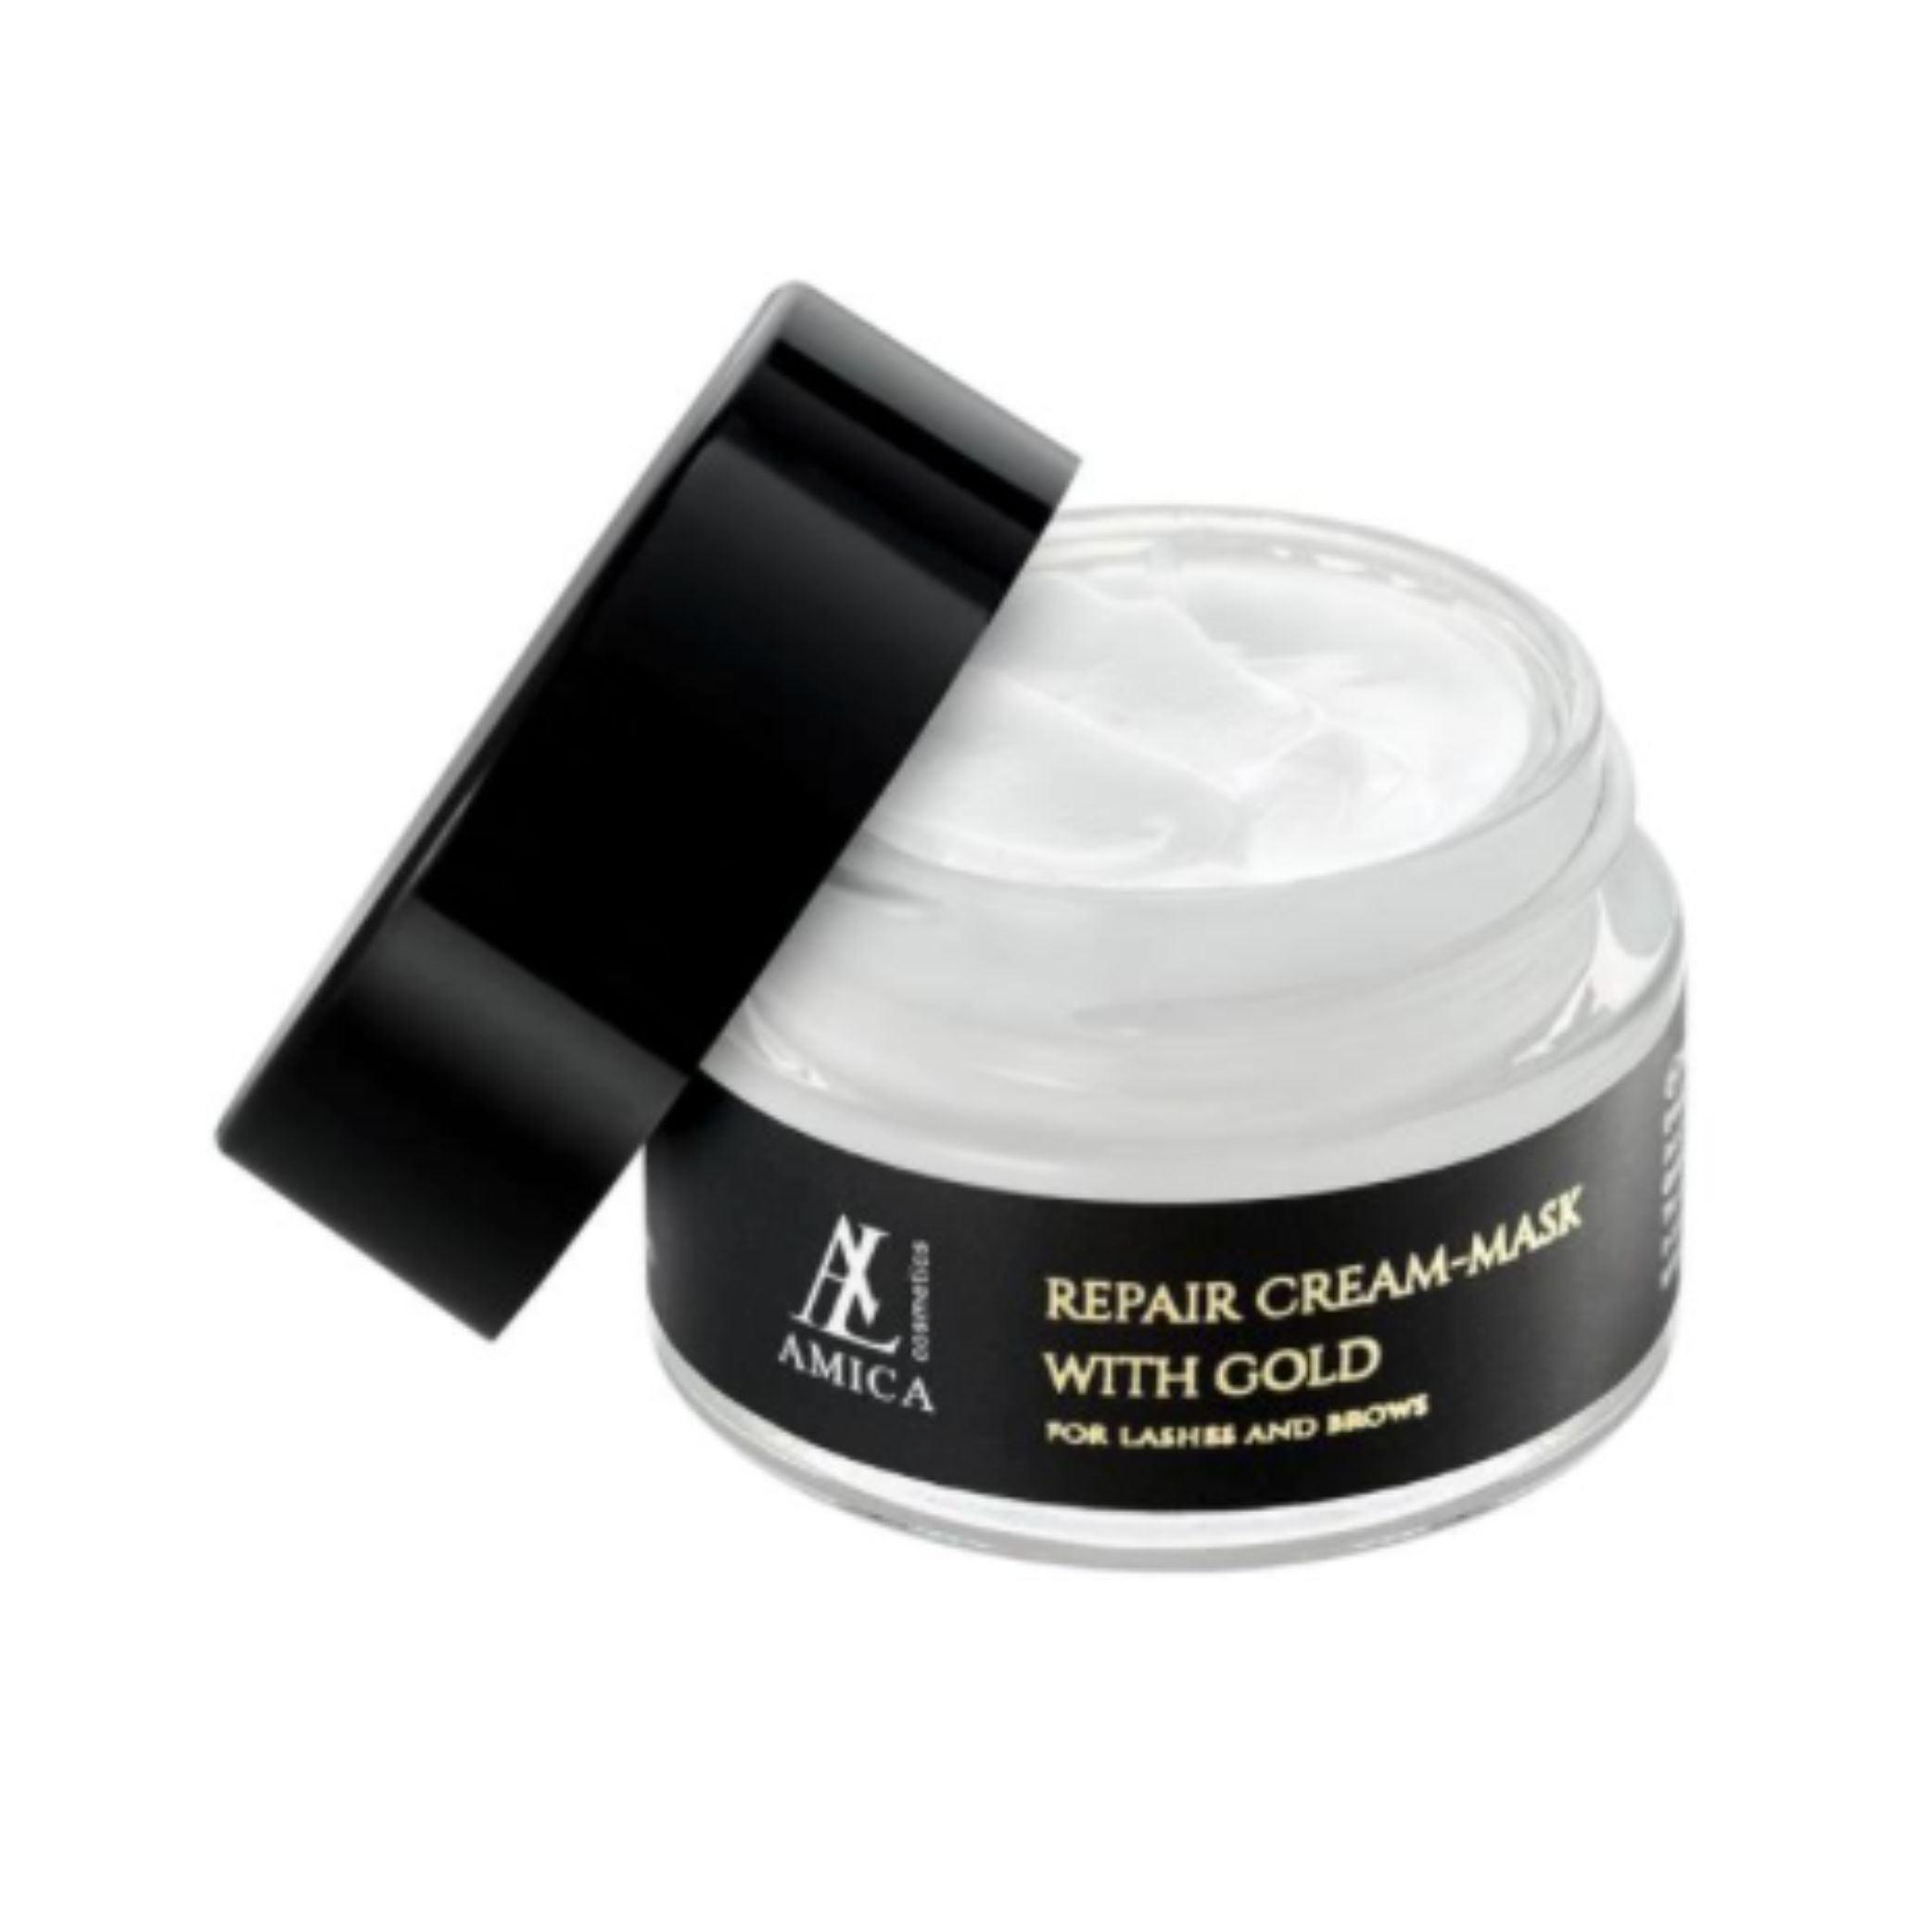 Amica Lashes Repair Cream-Mask with Gold - The Beauty House Shop